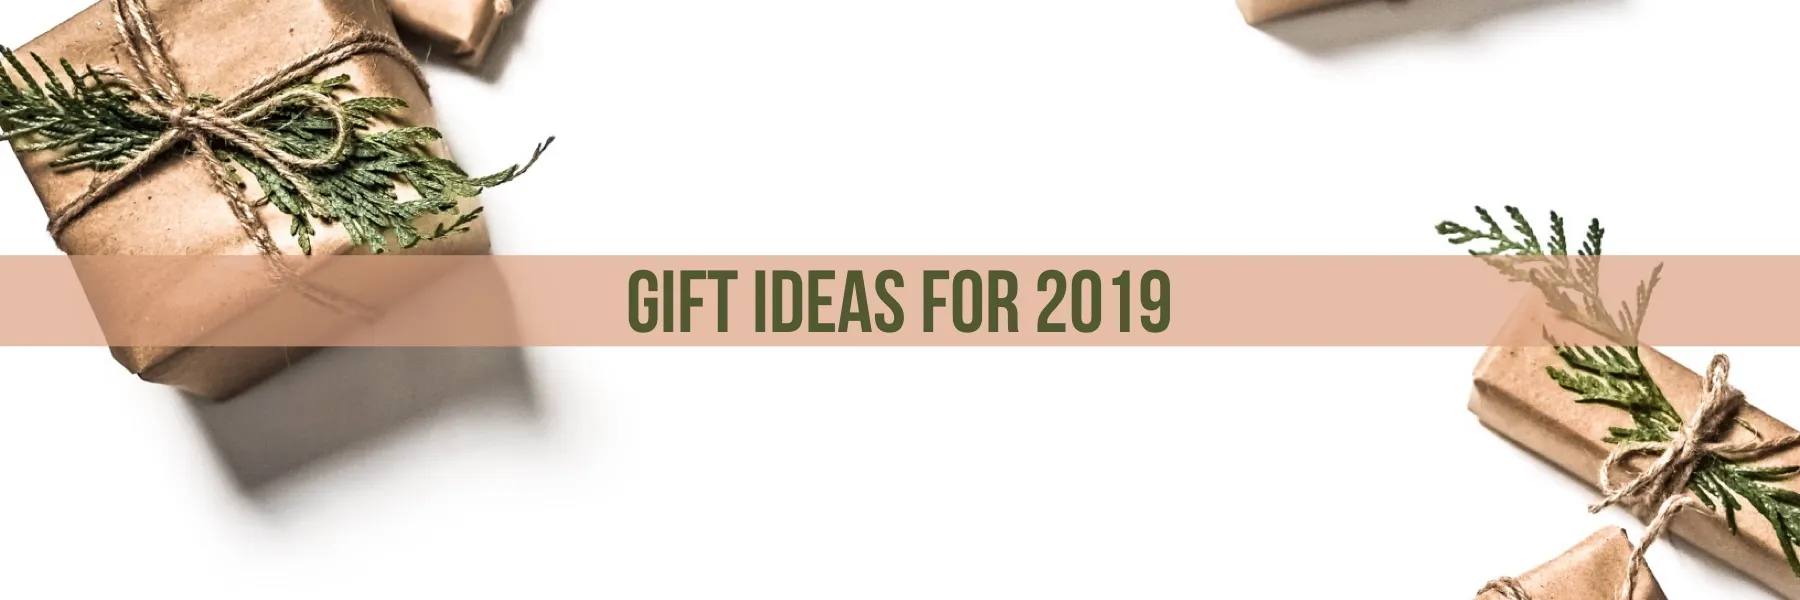 White and Brown Gift Ideas Banner